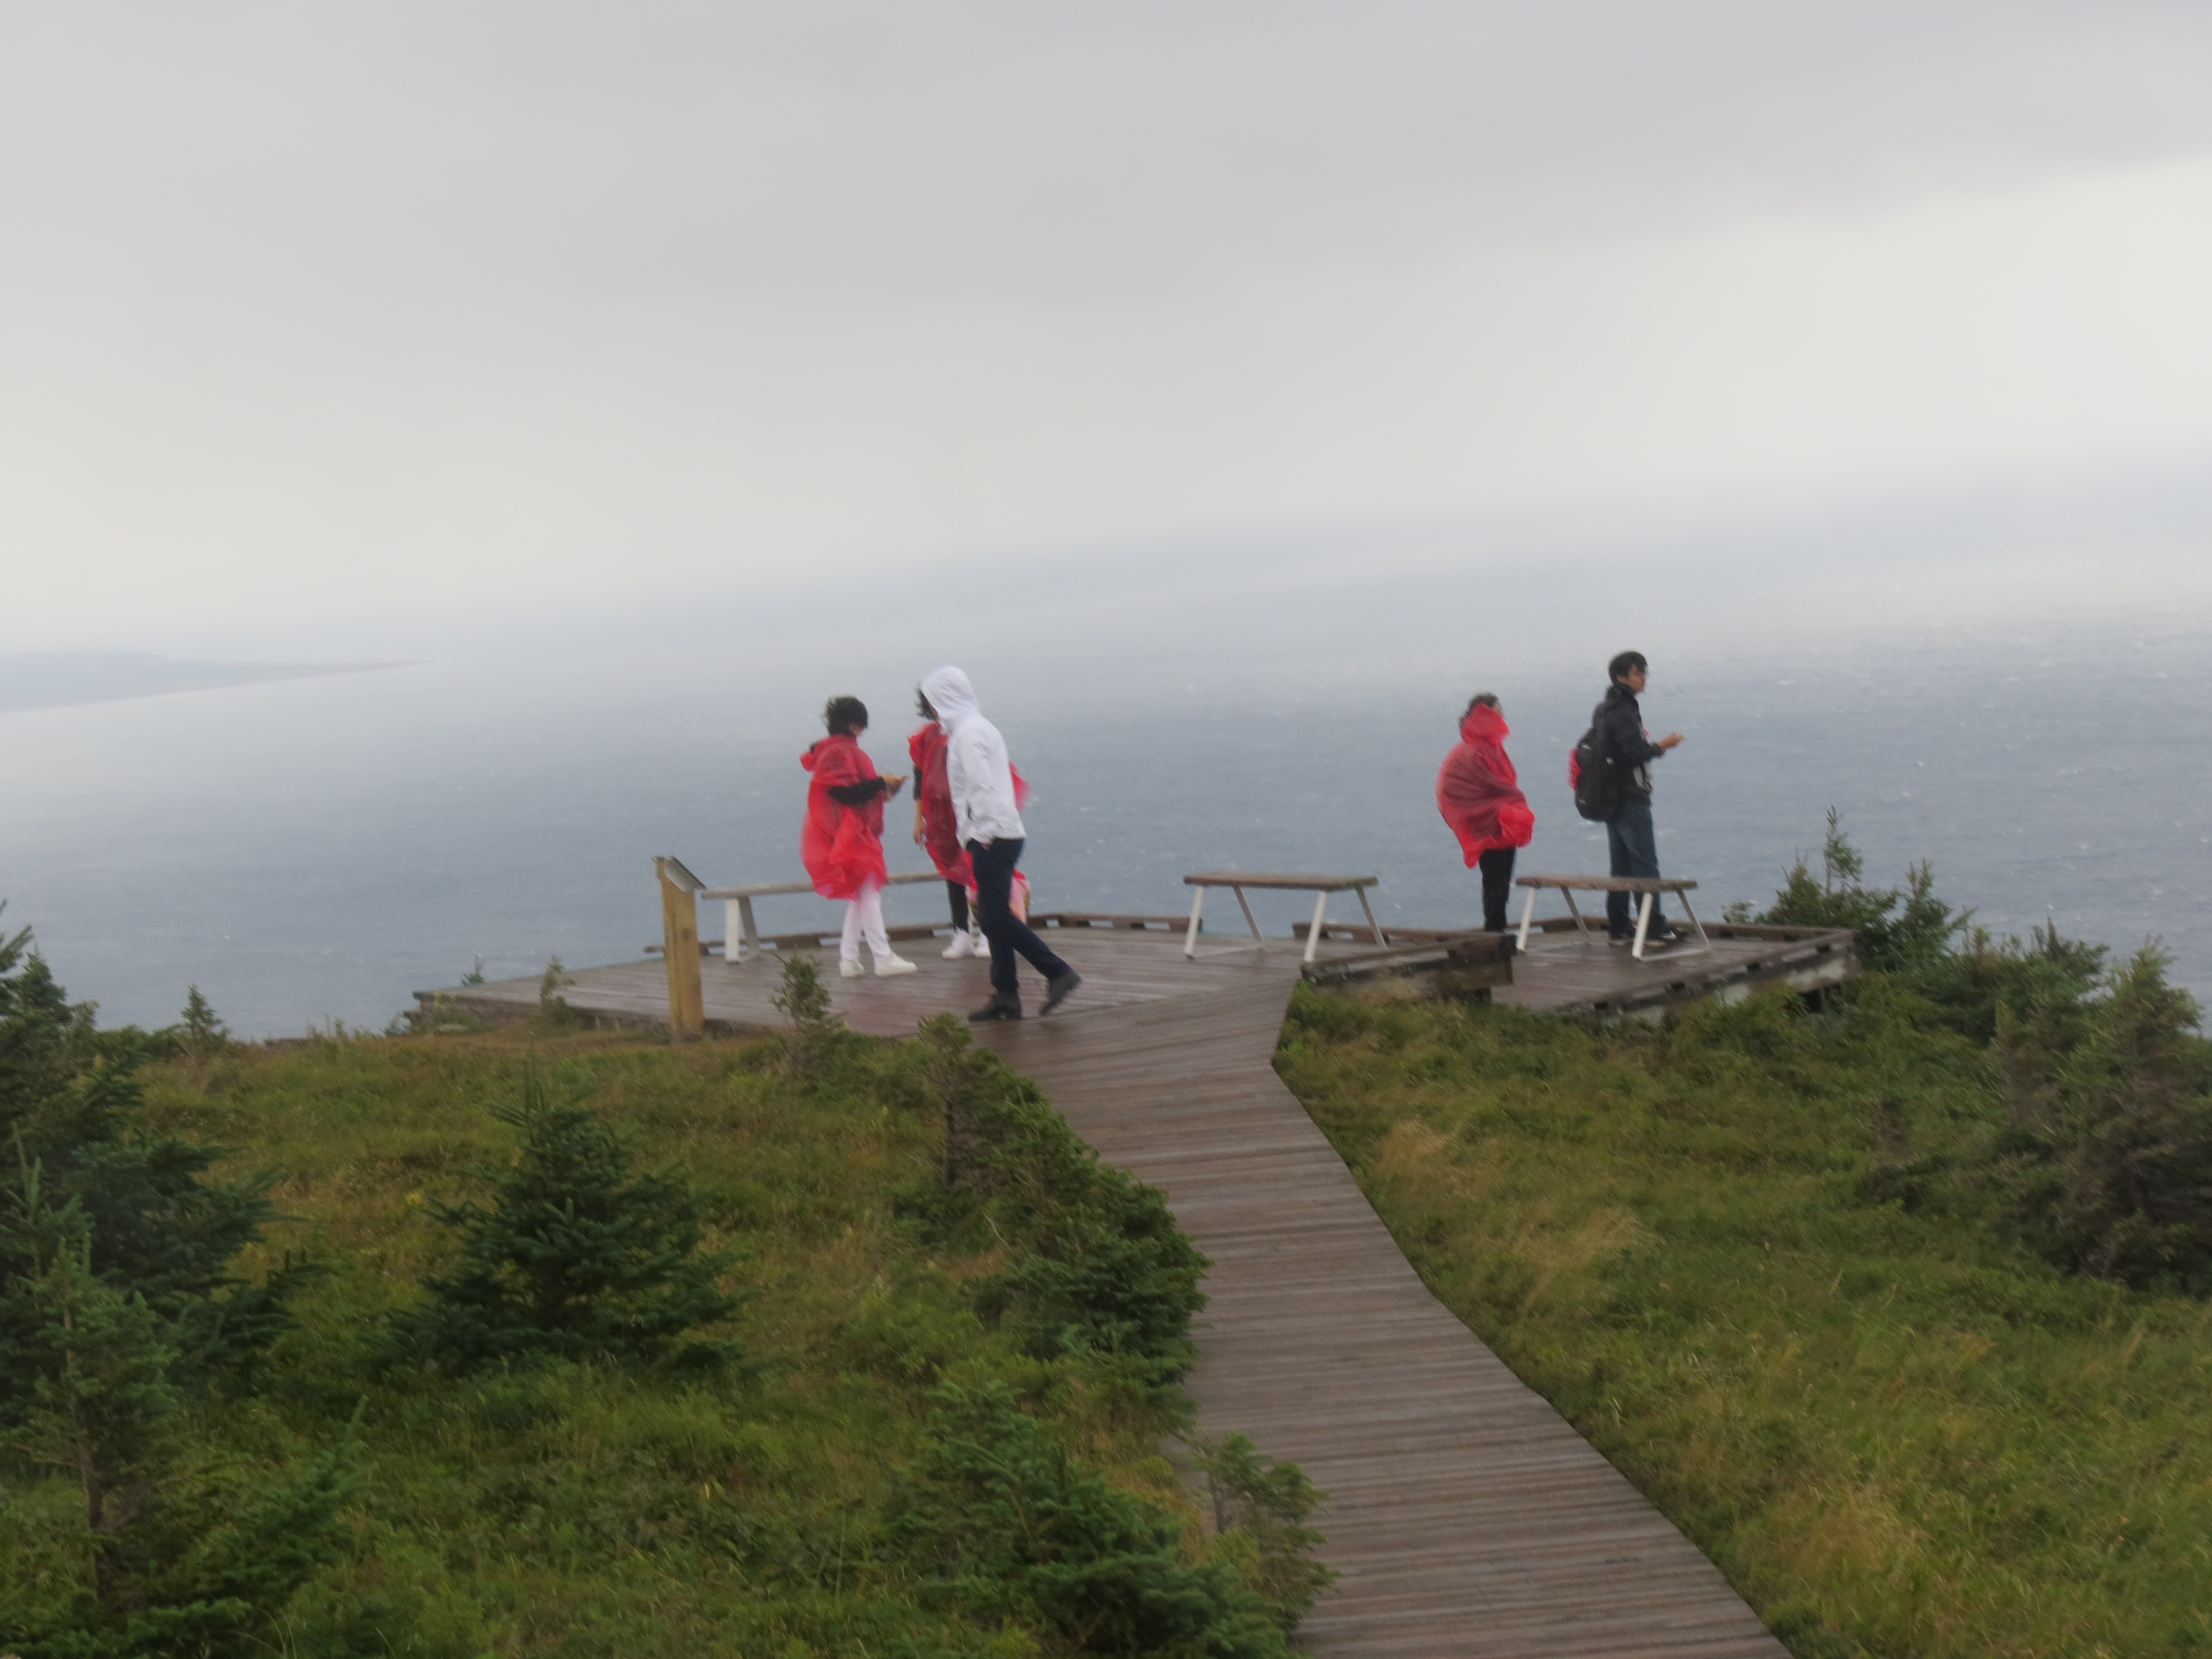 Chinese tourists experiencing intense wind on Skyline Trail, Cape Breton